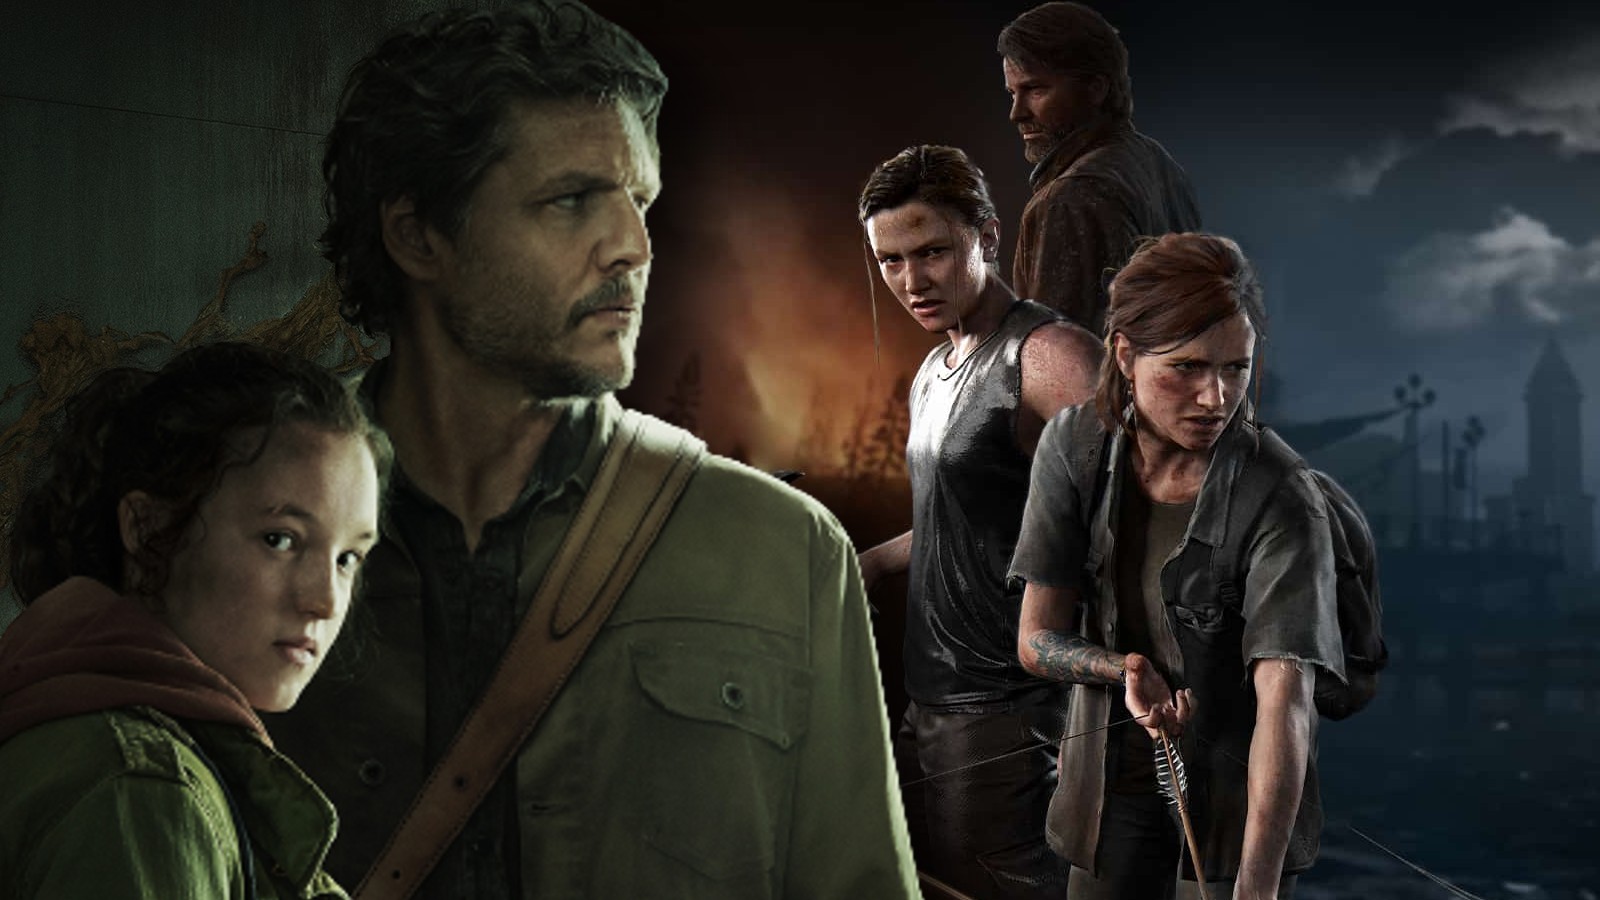 The Last of Us' Season 2? Release Date, Cast, Spoilers and More